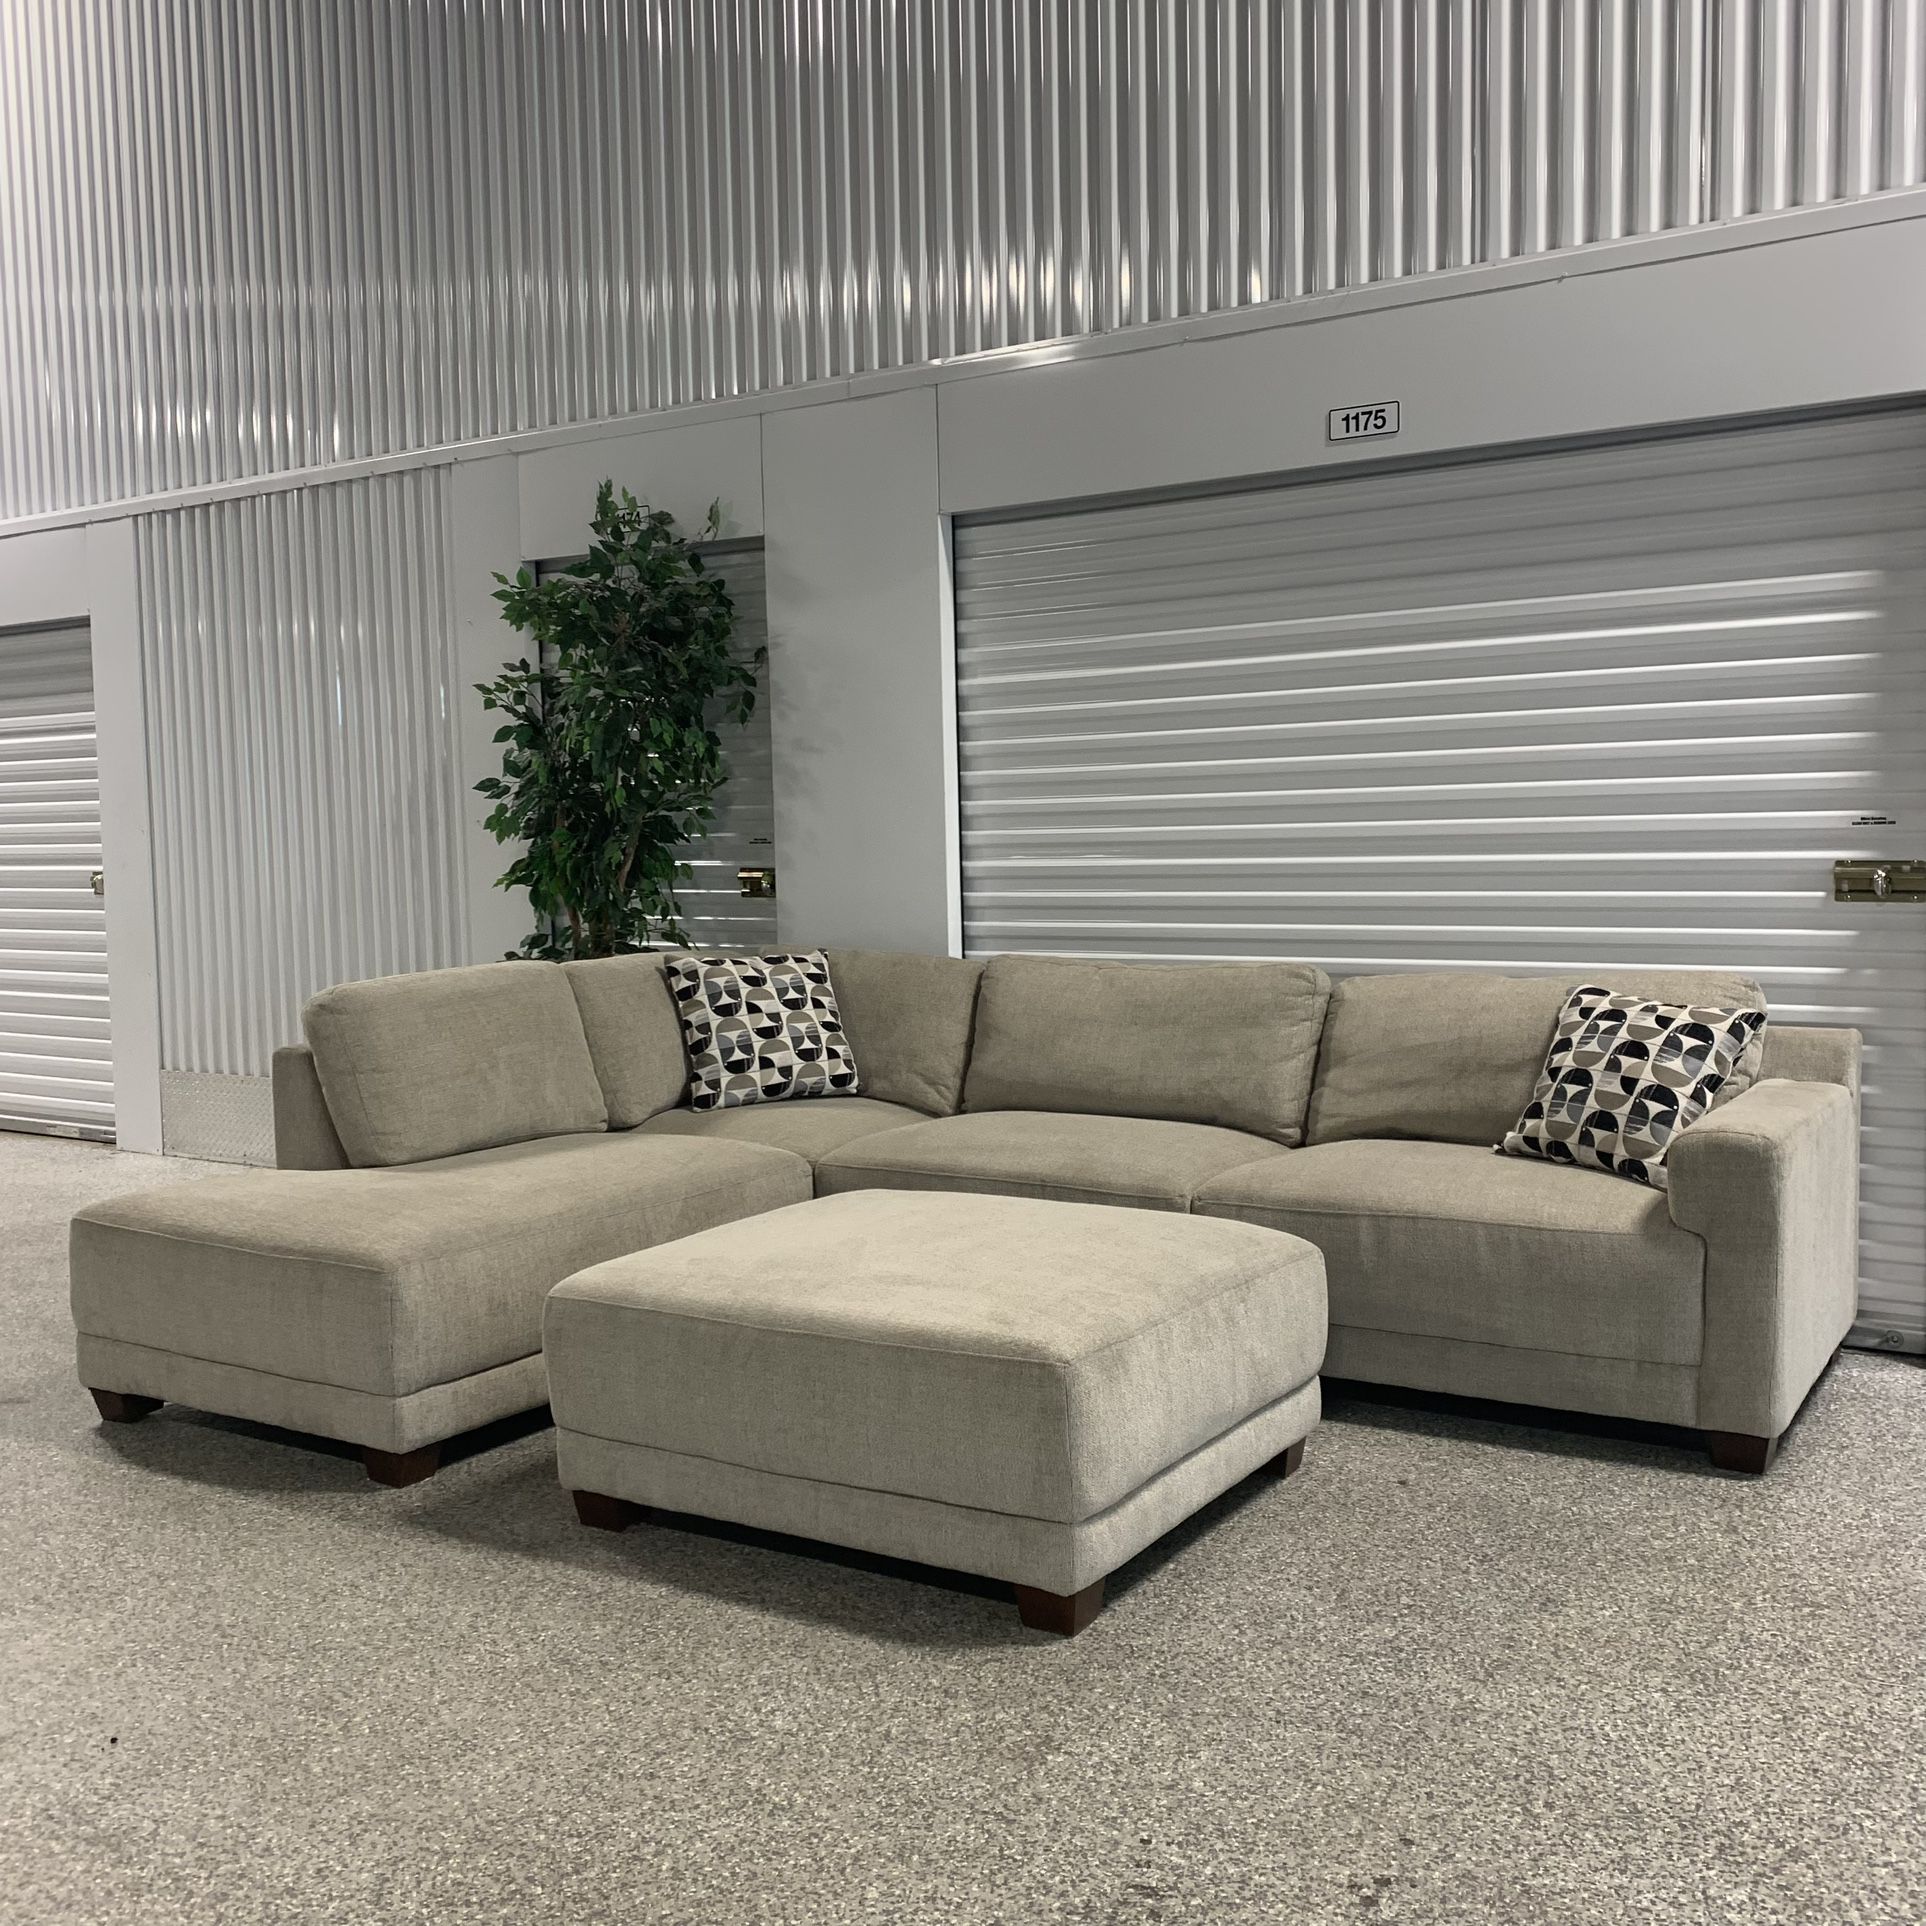 FREE DELIVERY - LIKE NEW Raylin Fabric Sectional With Ottoman - Beige